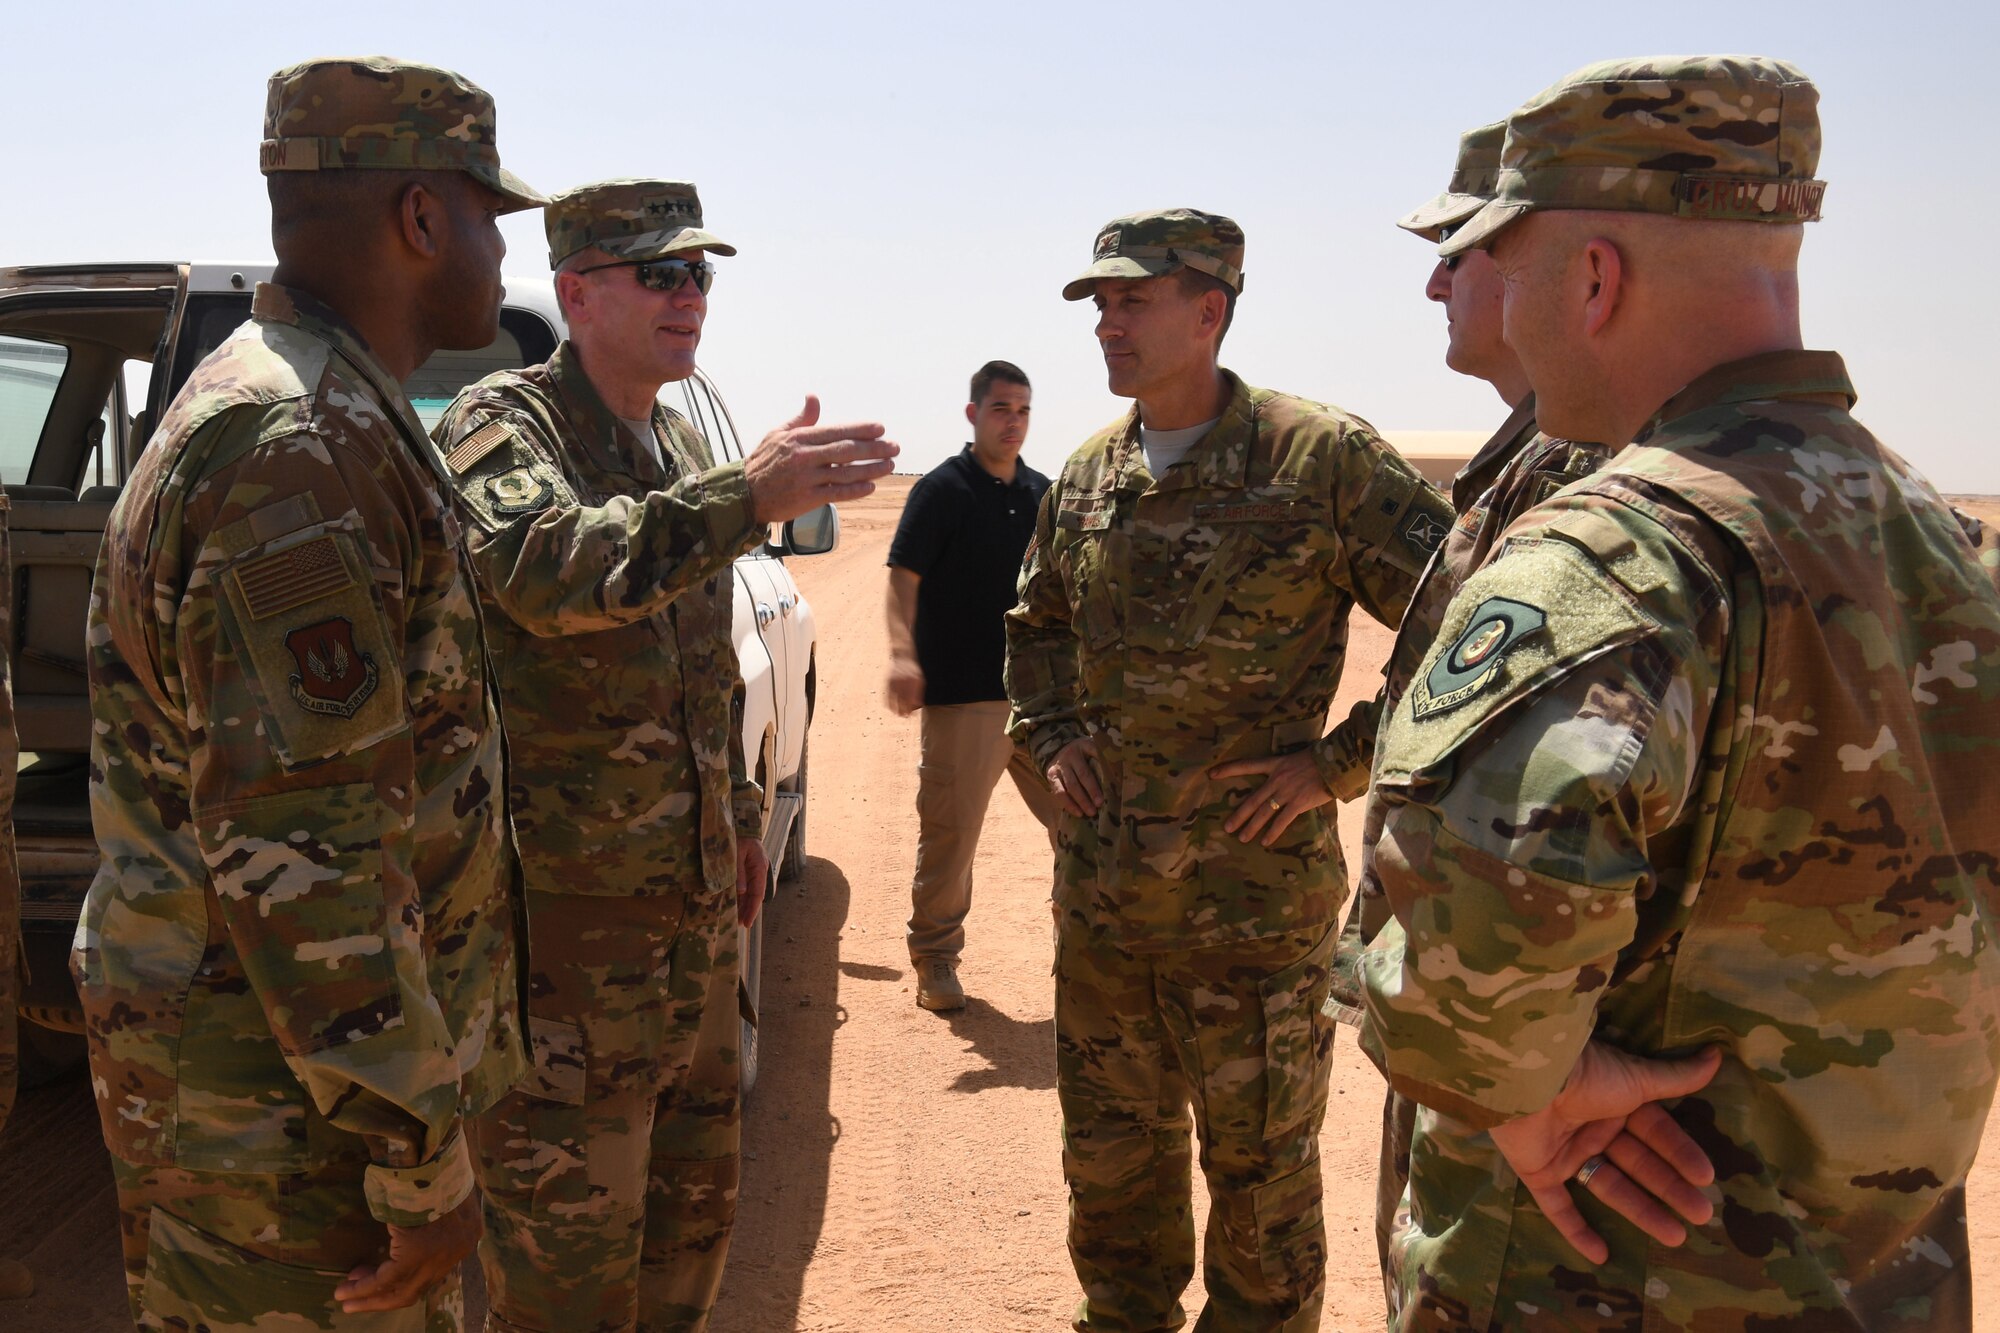 U.S. Air Force Gen. Tod D. Wolters, U.S. Air Forces in Europe-Air Forces Africa commander, and leaders from U.S. Air Forces in Europe-Air Forces Africa, 3rd Air Force, and the 435th Air Expeditionary Wing discuss operations at Nigerien Air Base 201, Niger, Oct. 25, 2018. The tour allowed USAFE-AFAFRICA leadership to see progress at the construction sites and base facilities first-hand. (U.S. Air Force photo by Tech. Sgt. Rachelle Coleman)